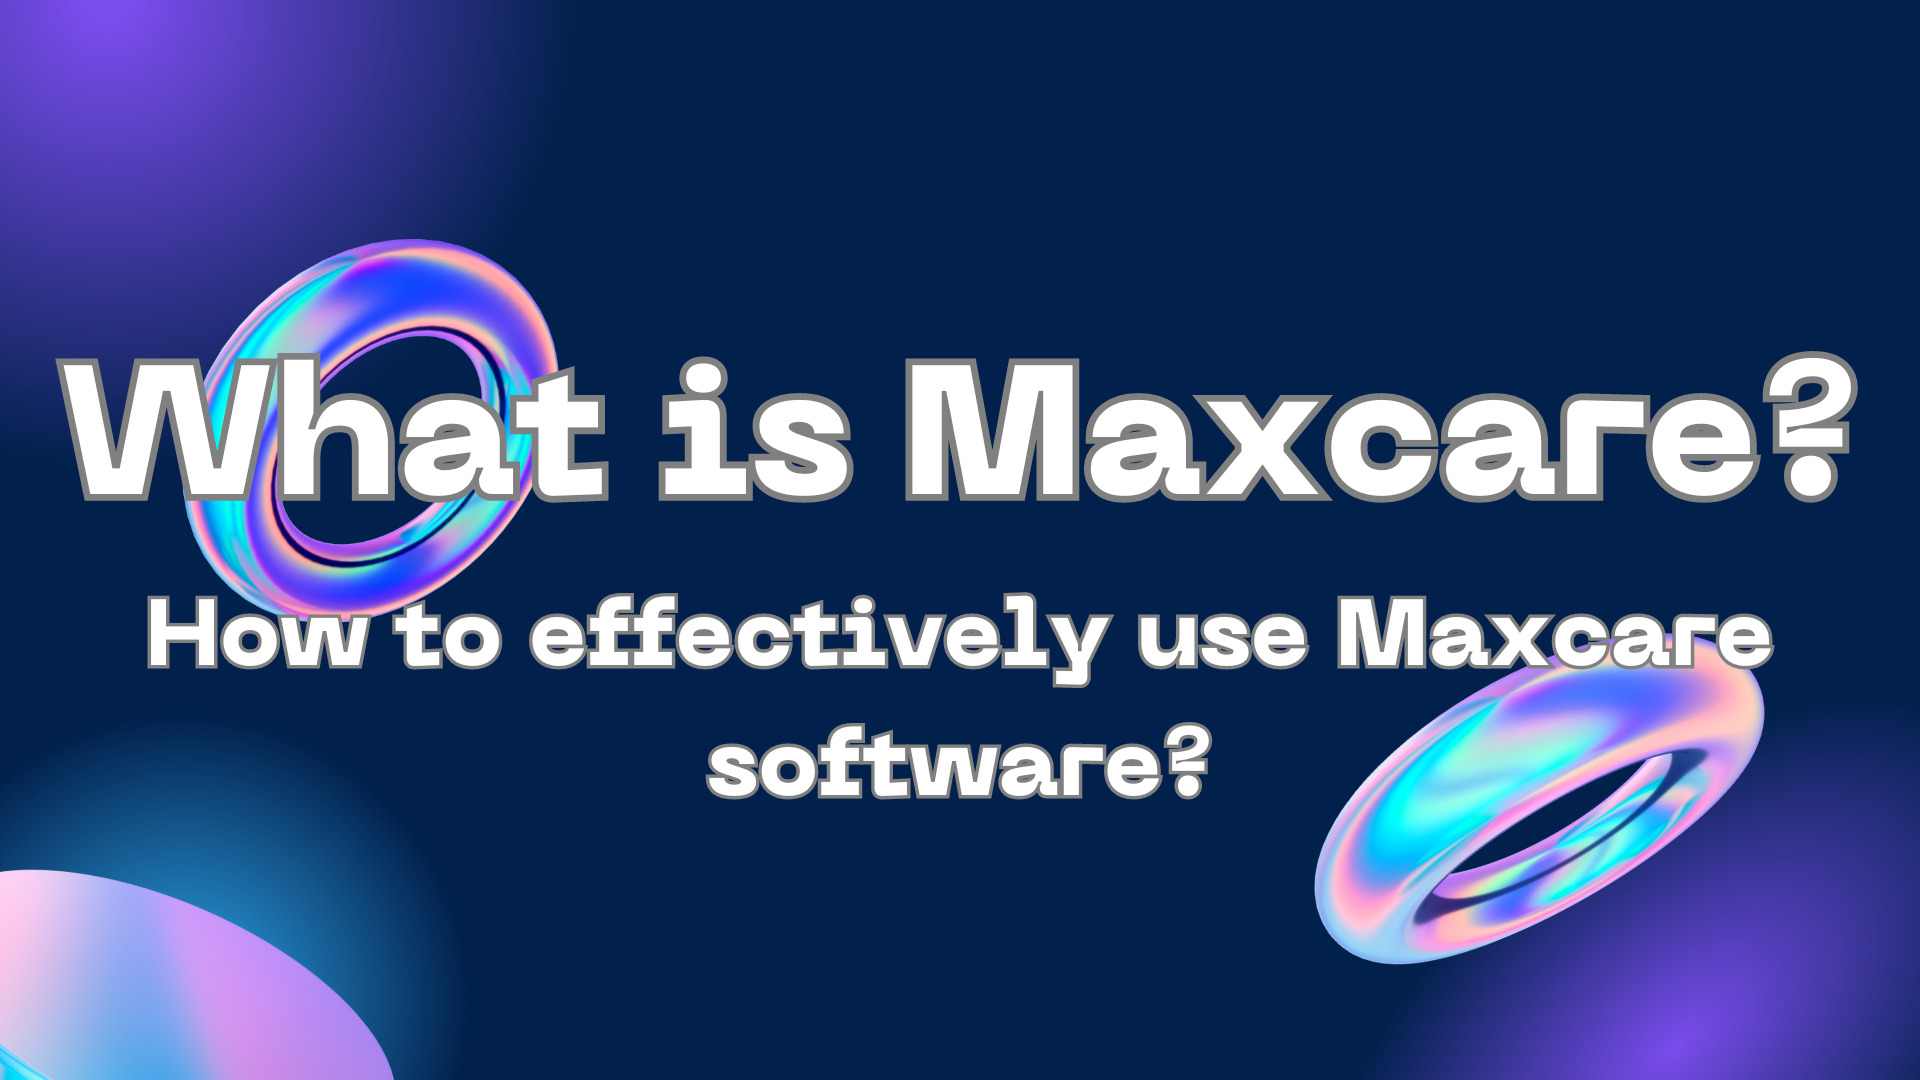 What is Maxcare? How to effectively use Maxcare software